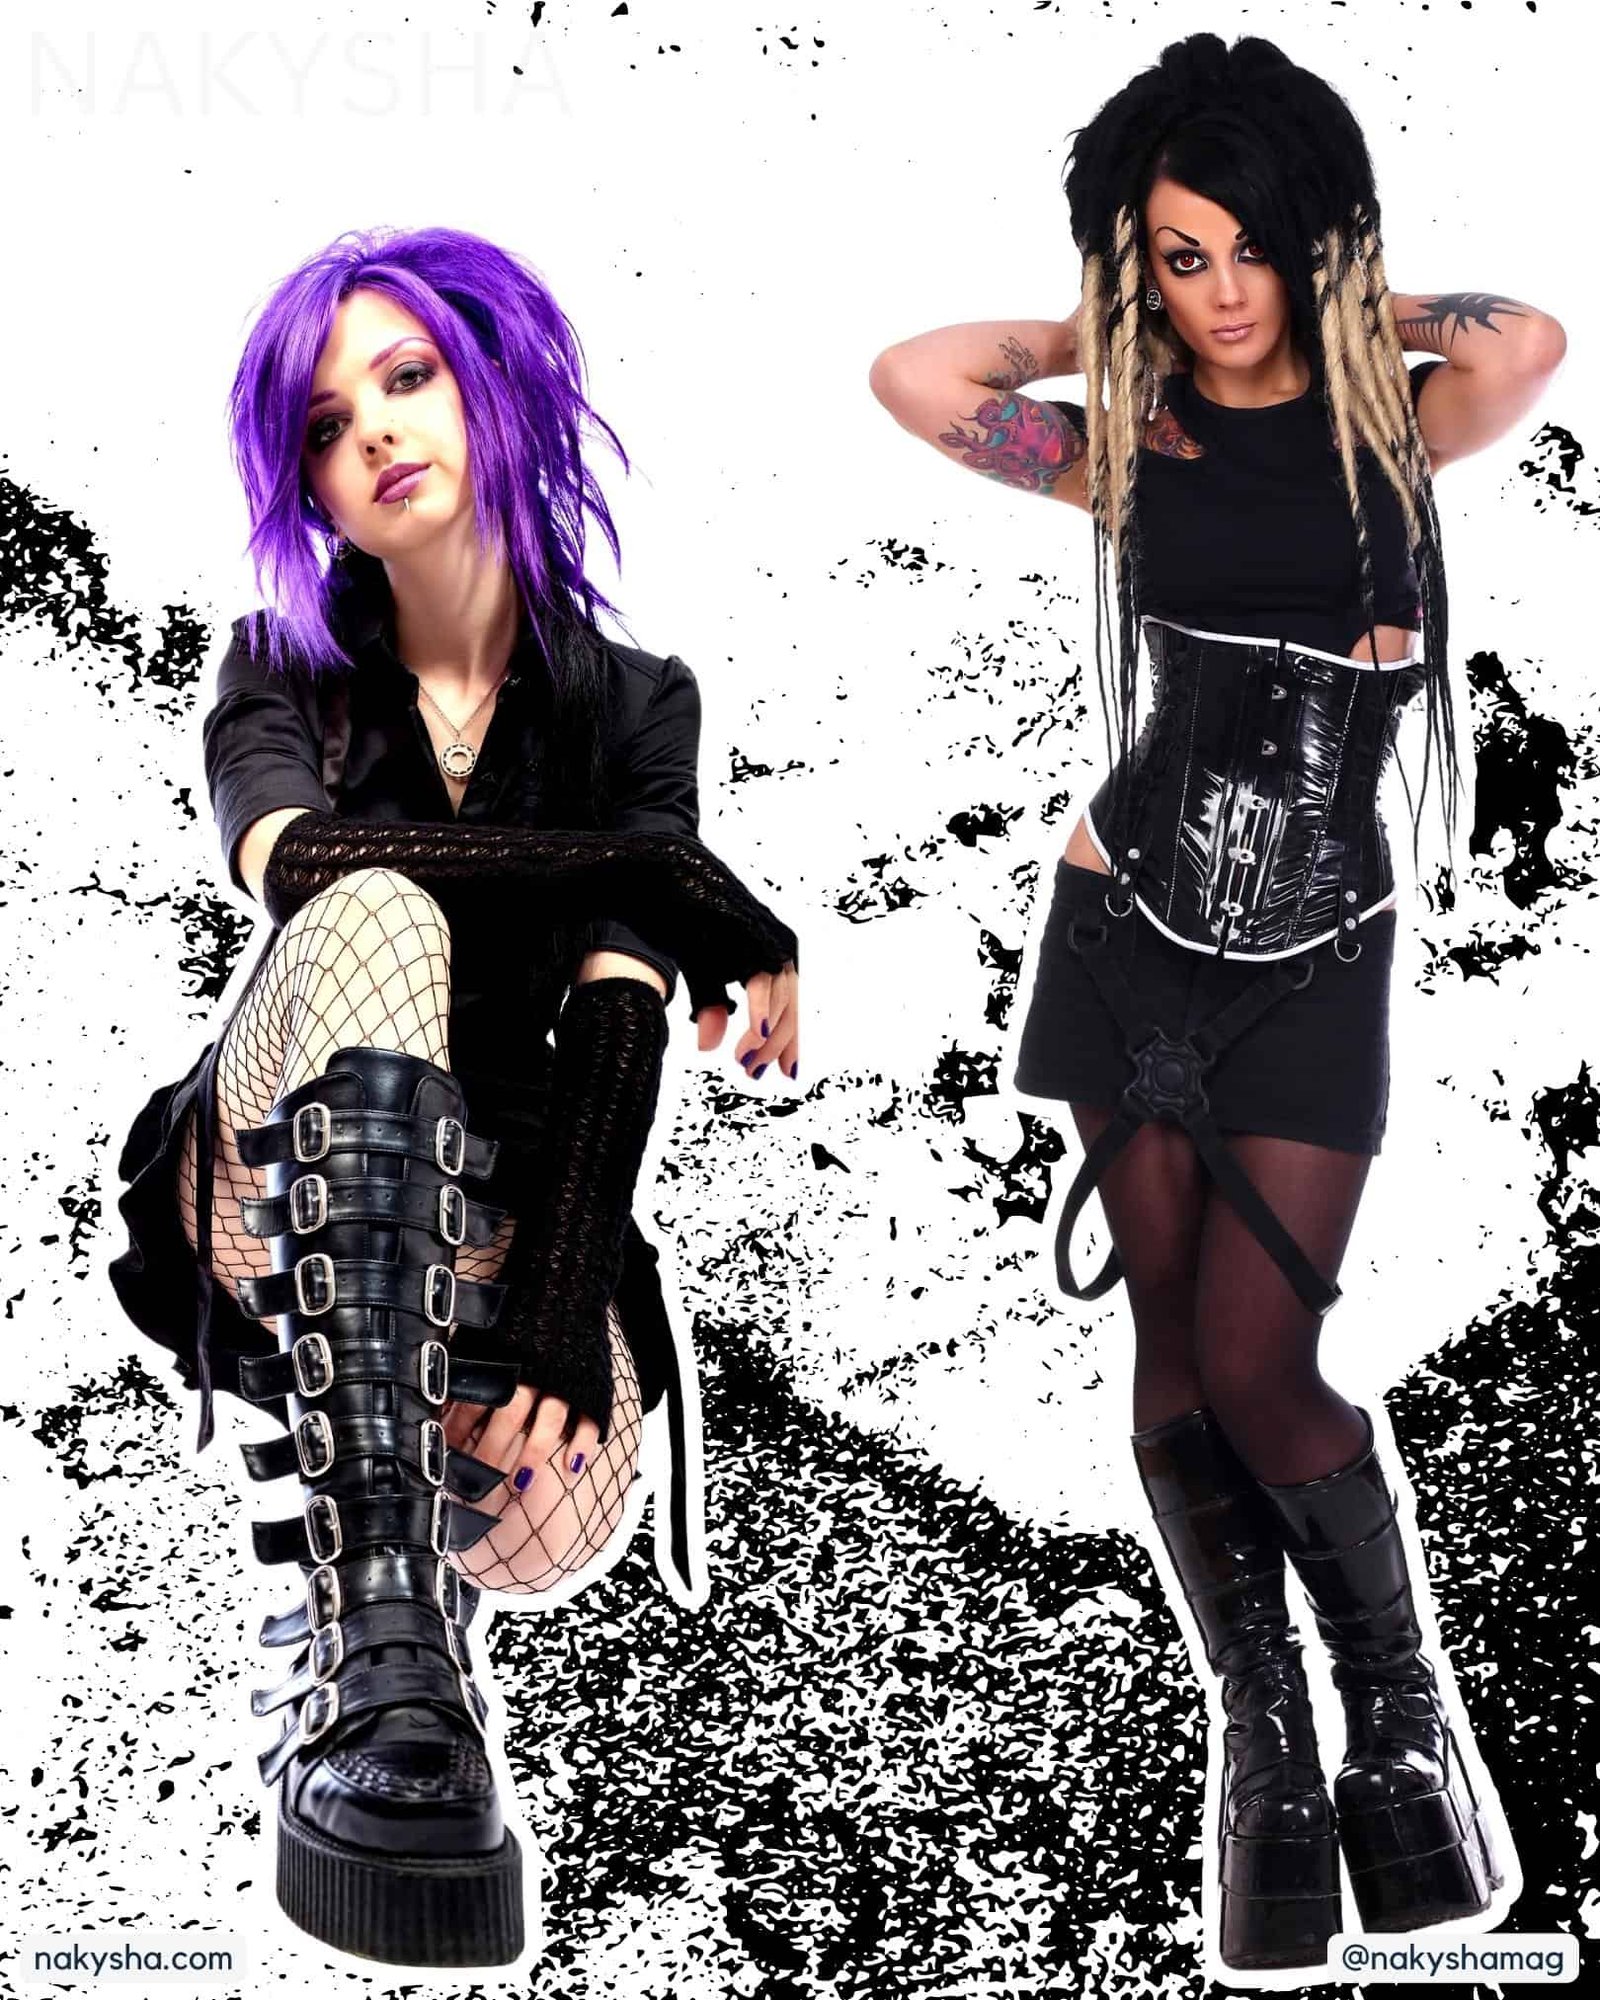 The Definitive Emo Fashion Guide and Outfit Ideas